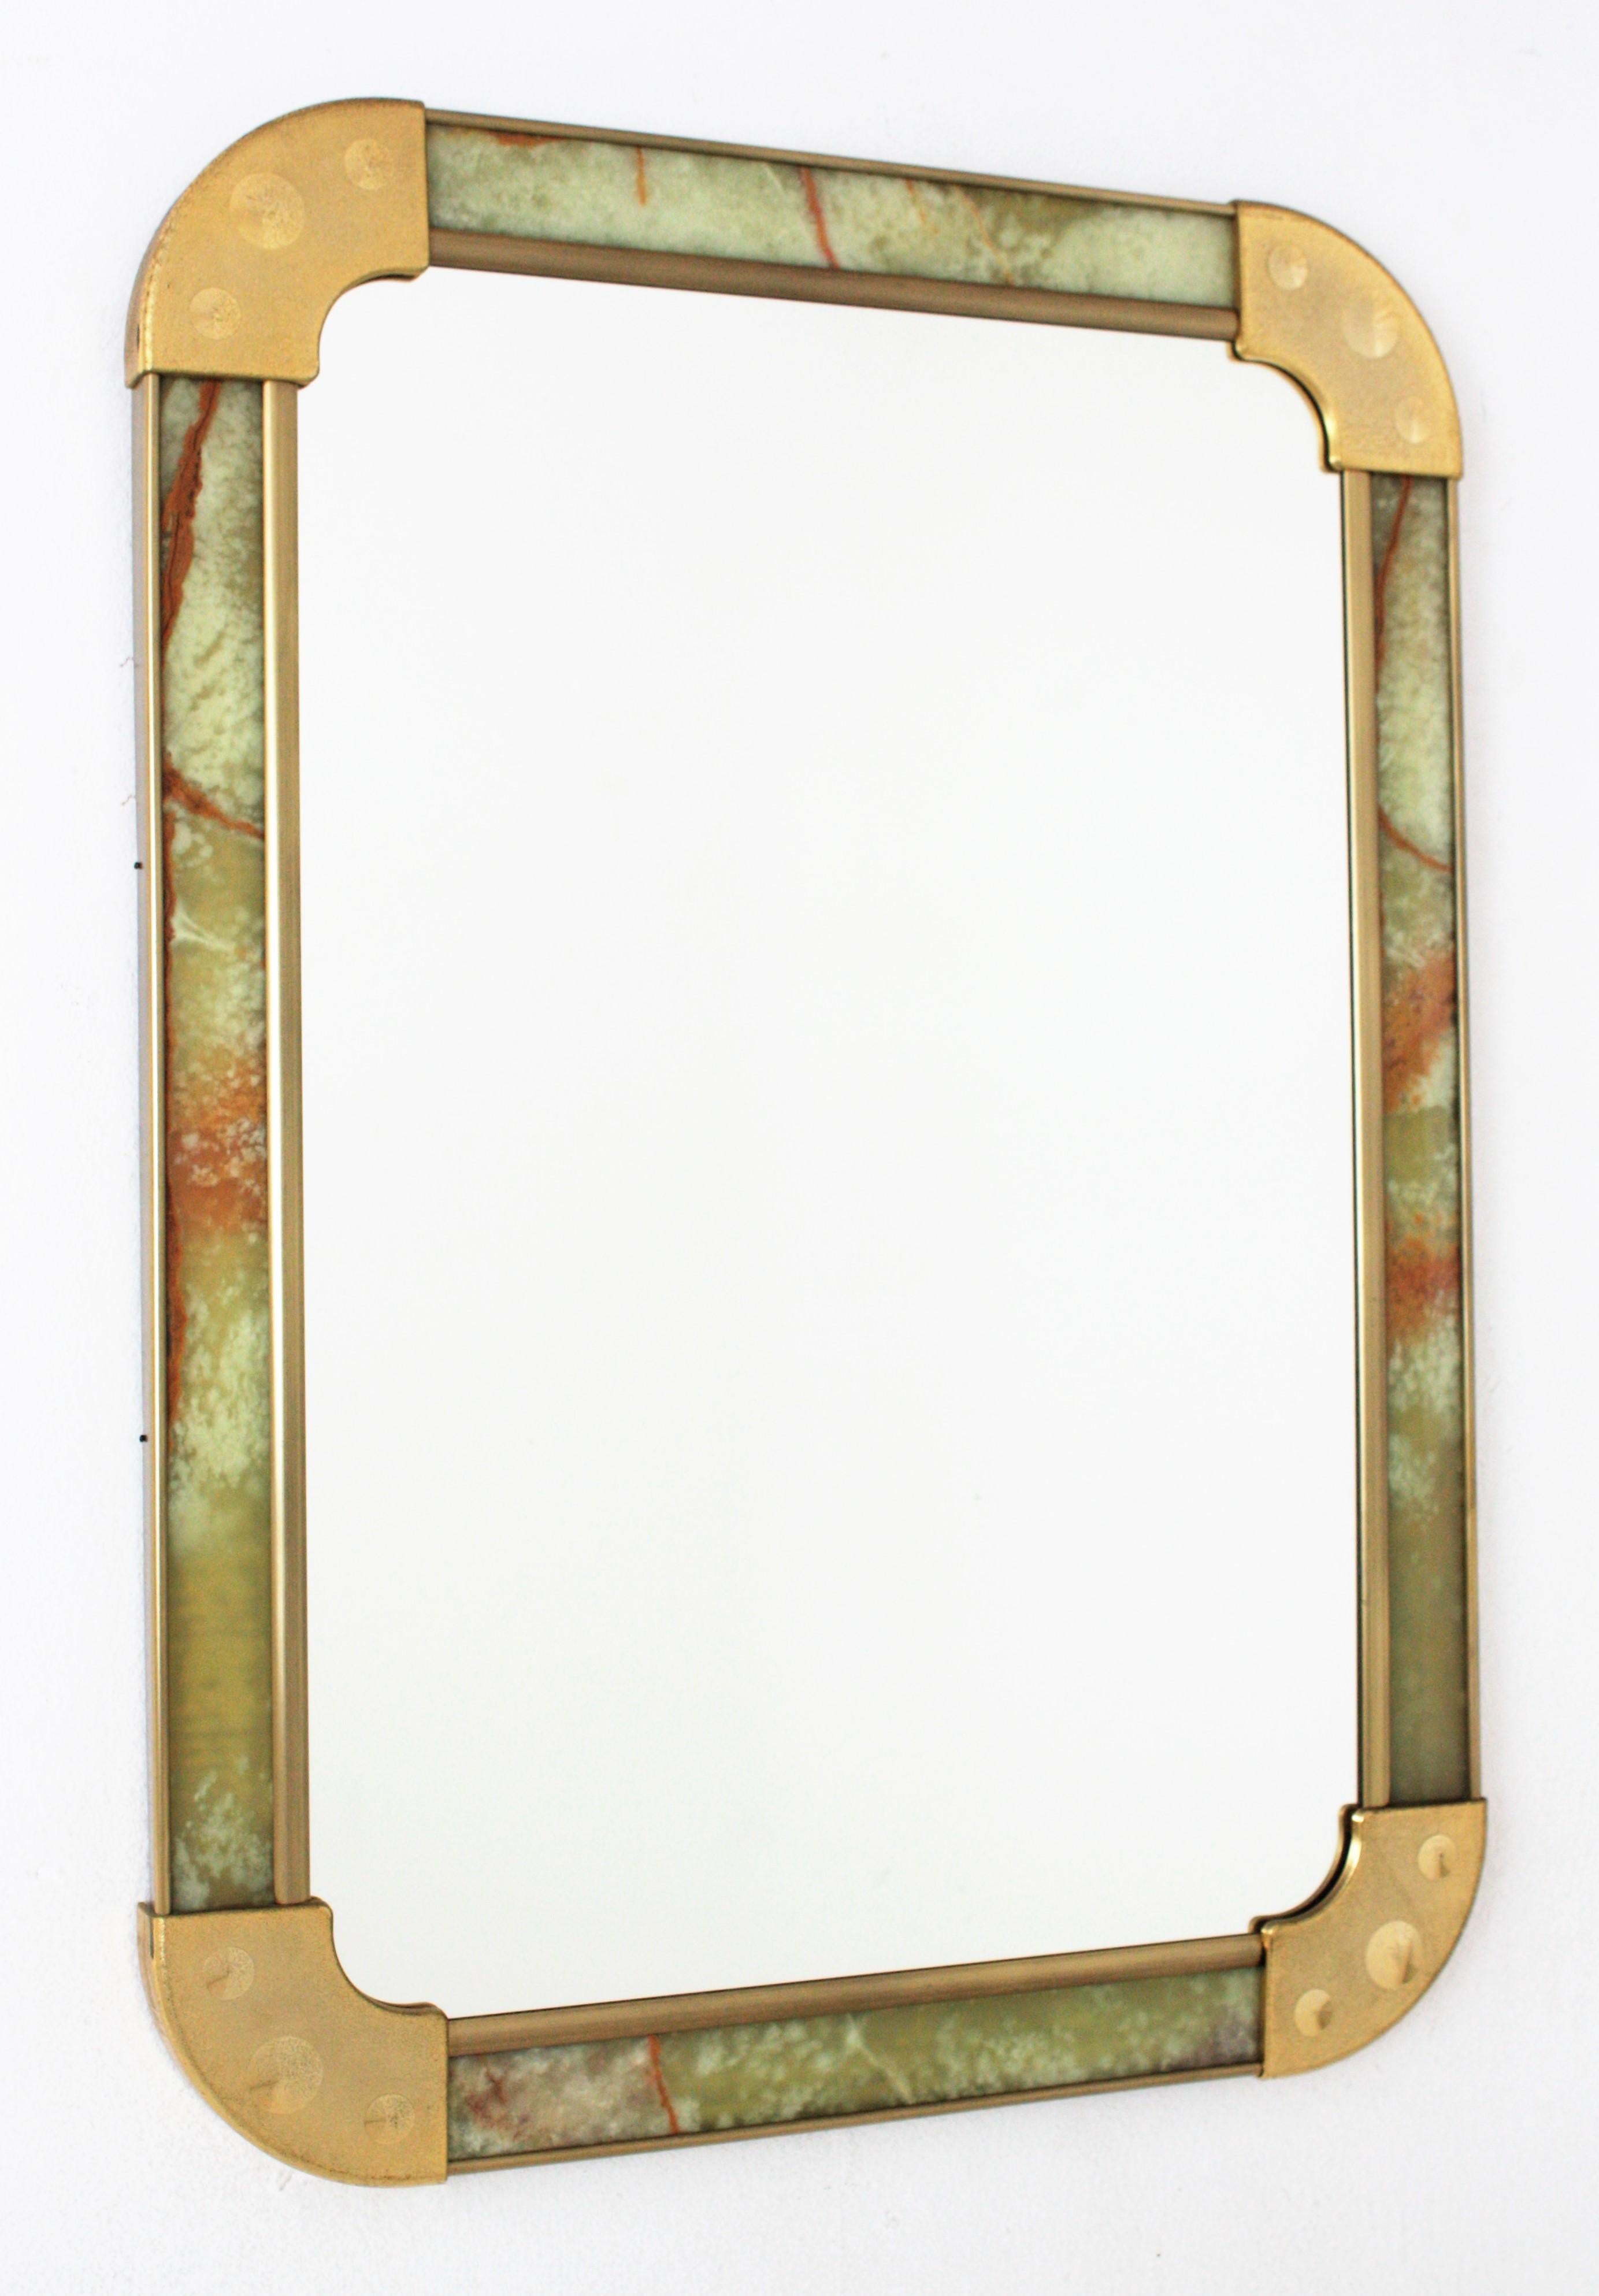 Rectangular wall mirror with onyx frame and gilt metal accents, Spain, 1960s-1970s.
This wall mirror has a rectangular frame made with onyx panels and gilt acrylic rounded corners and brass accents surrounding the onyx panels. 
The onyx veins in